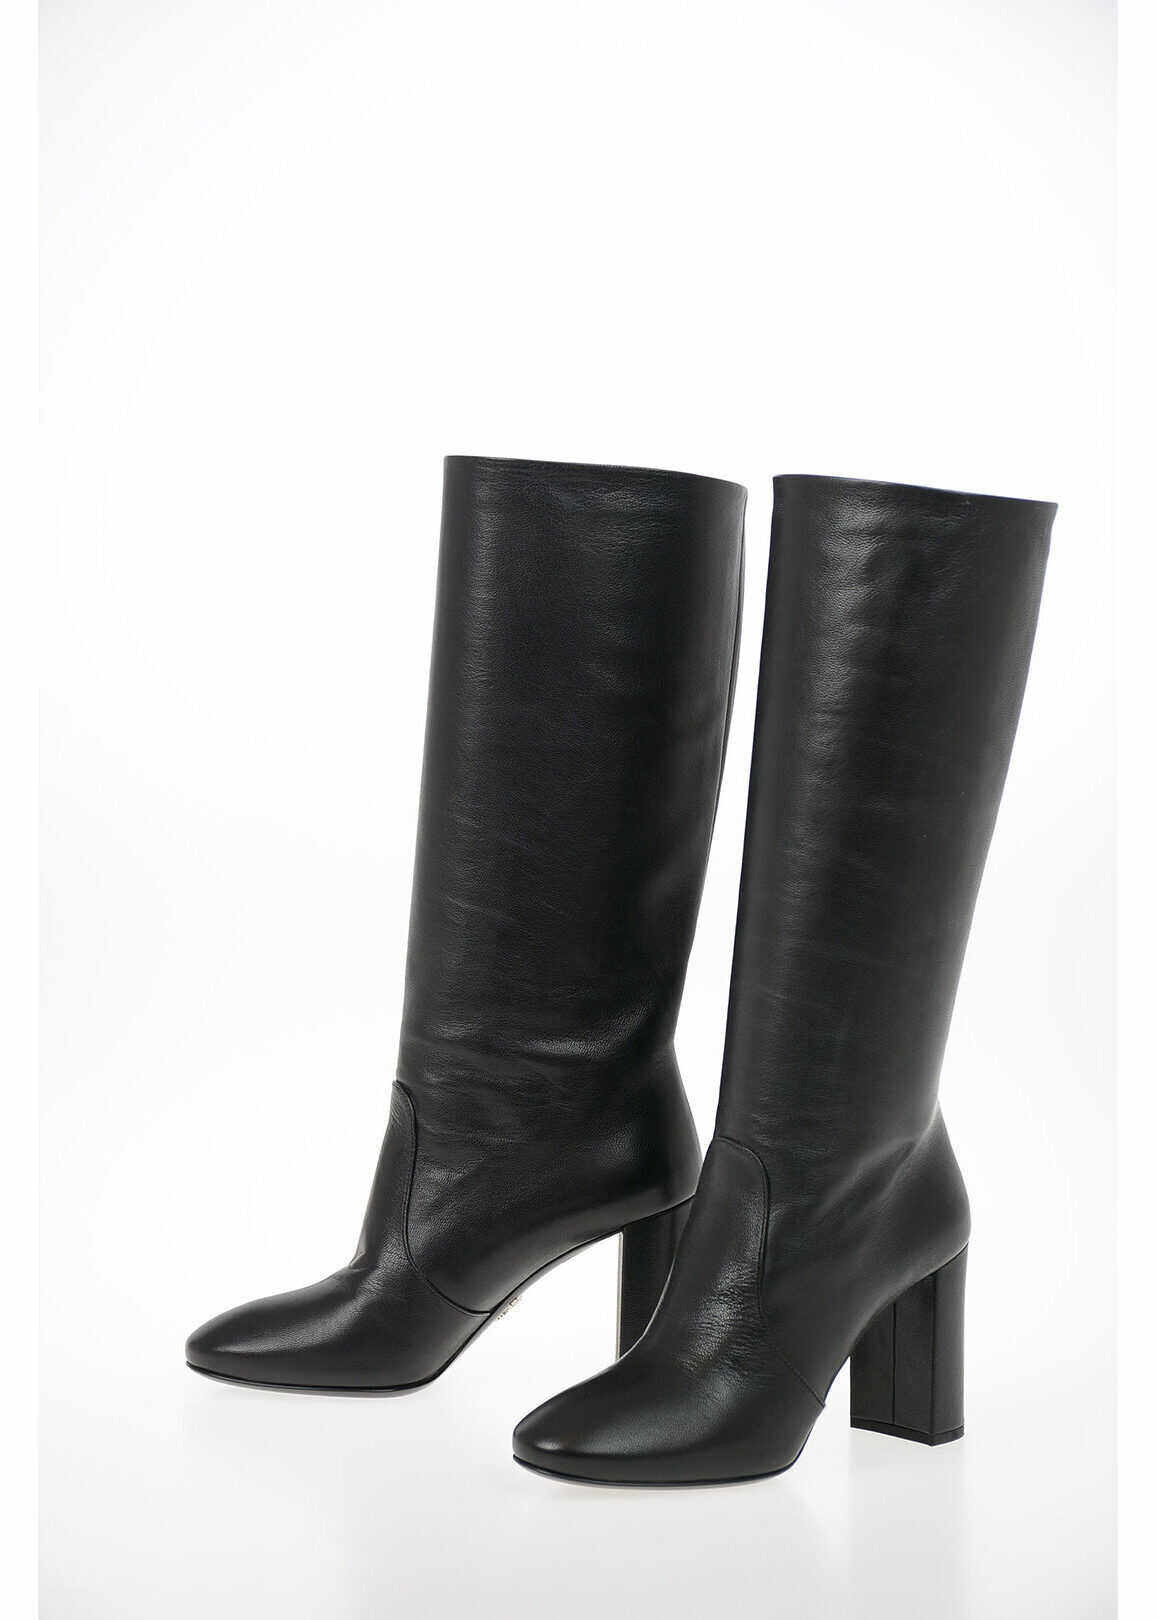 Prada Leather Pull On Boots With Squared Heel 8 Cm Black